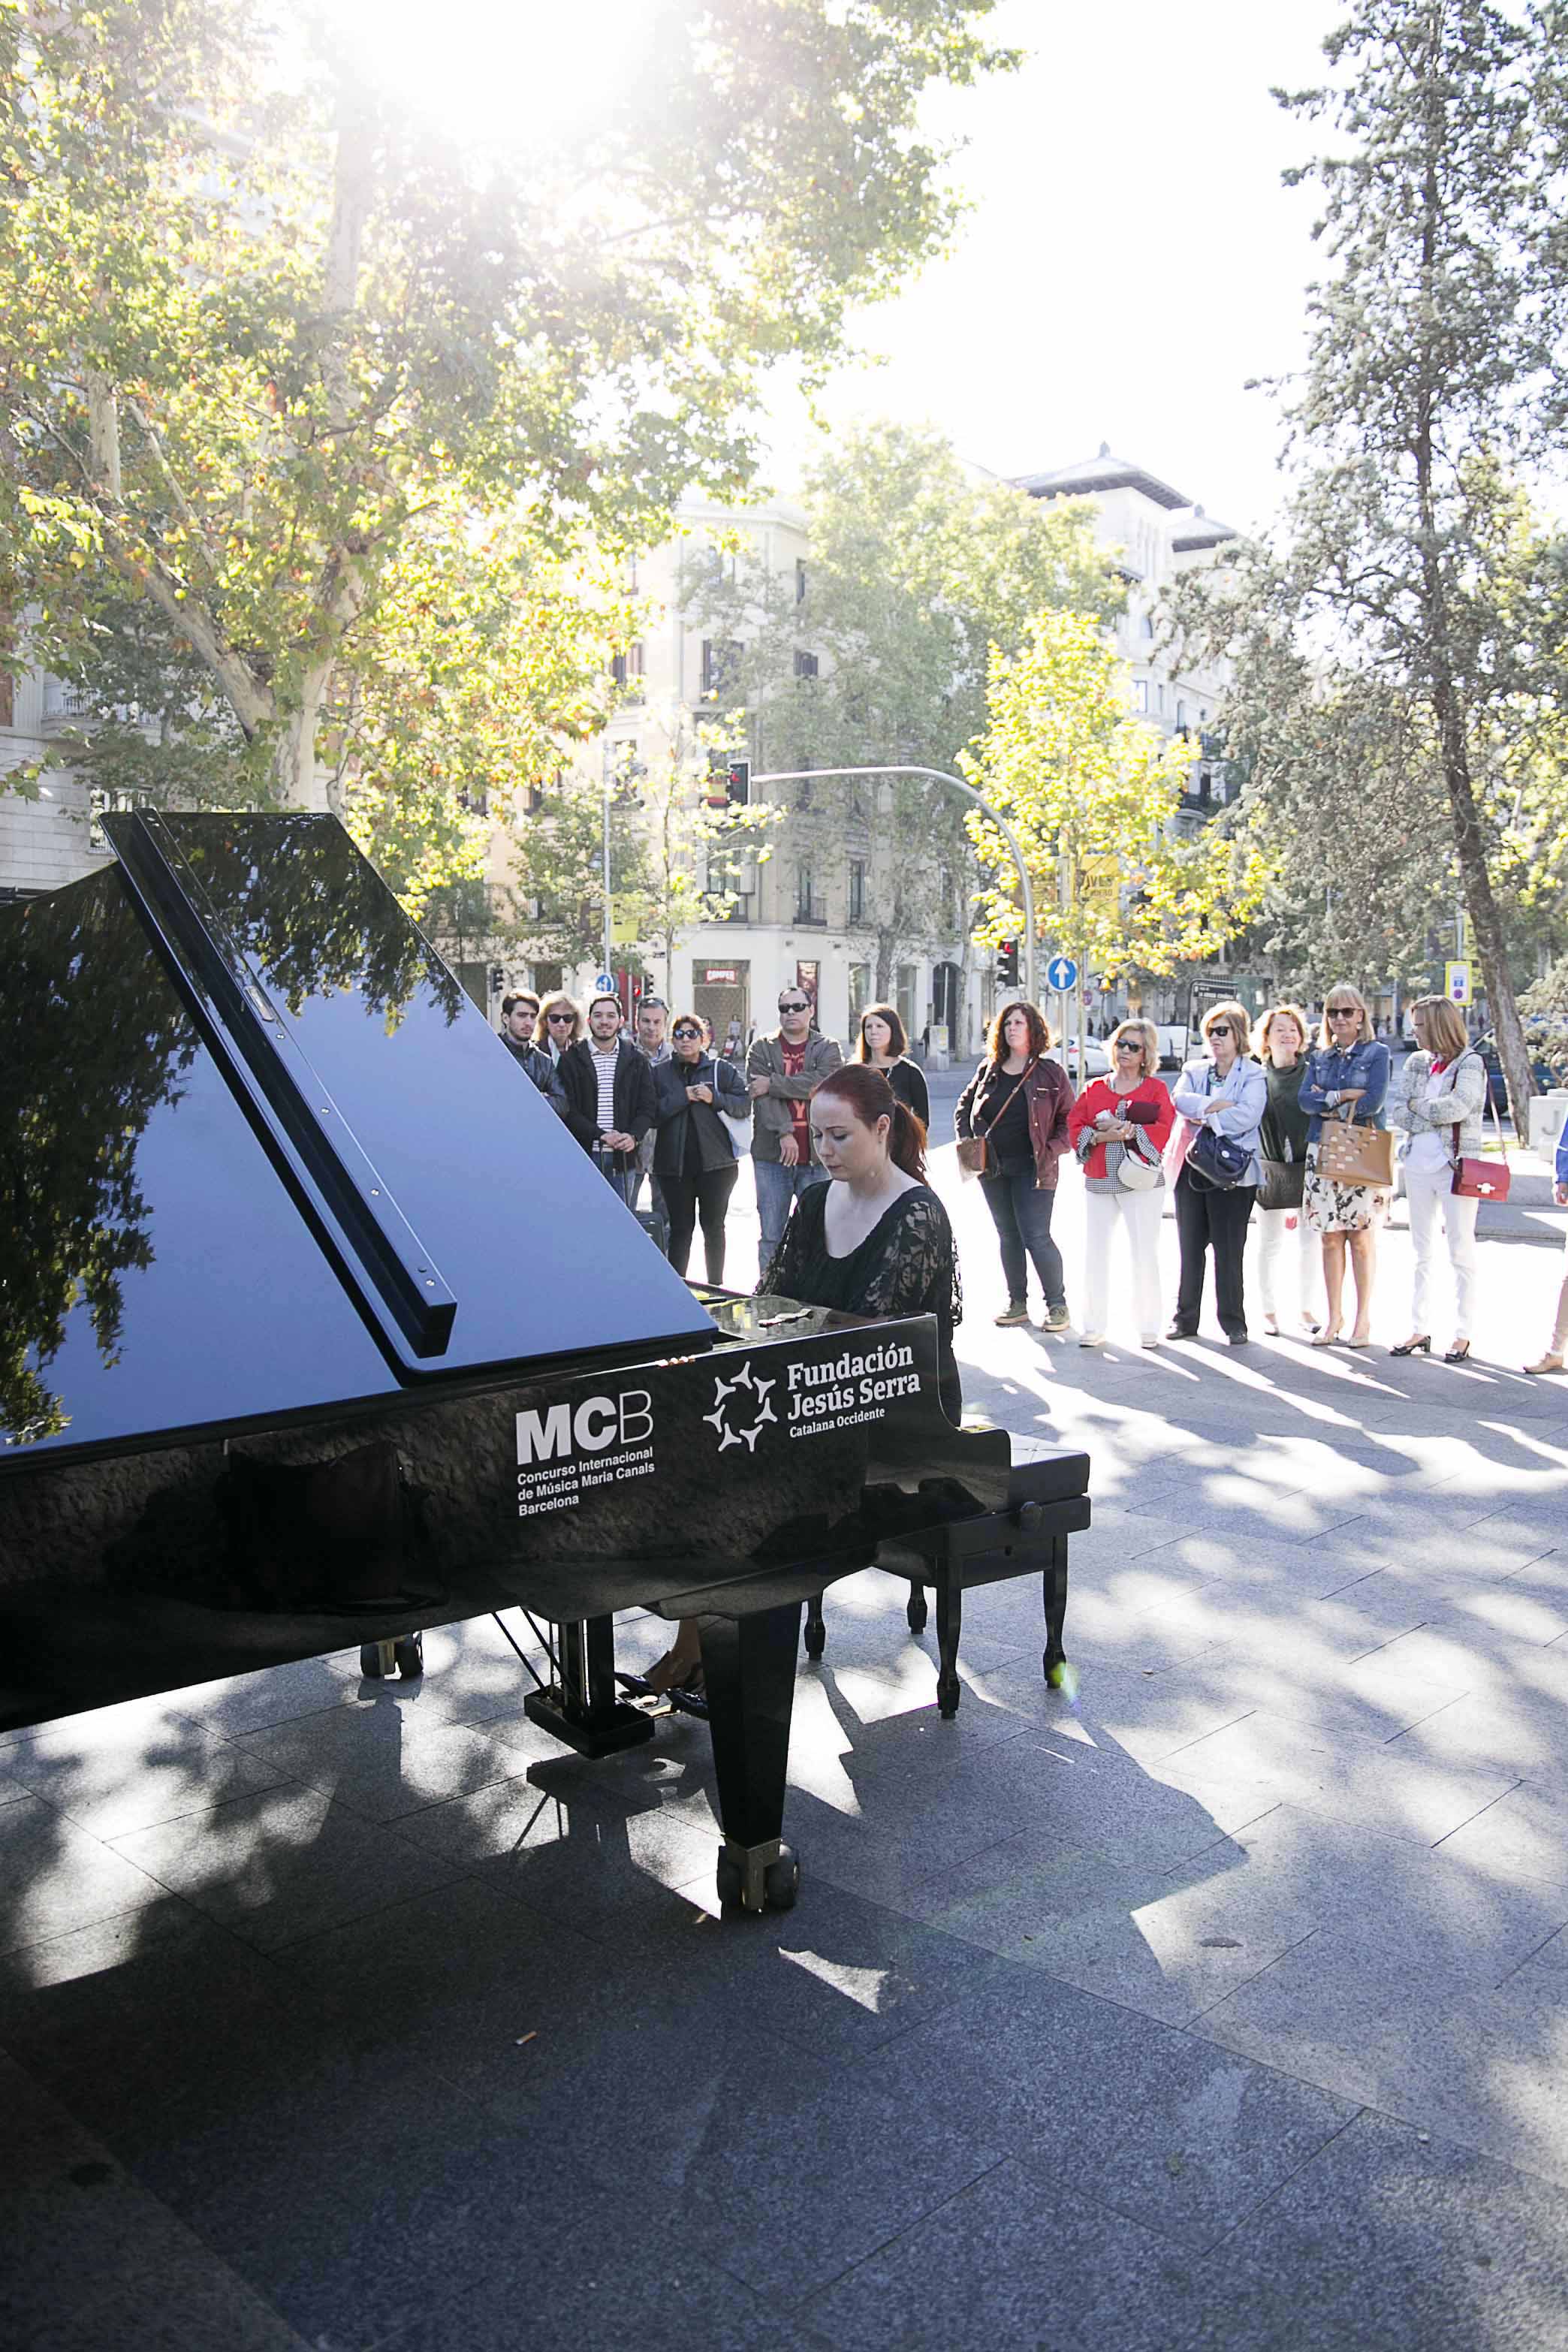 Paseo de Gracia is filled with pianos 2022